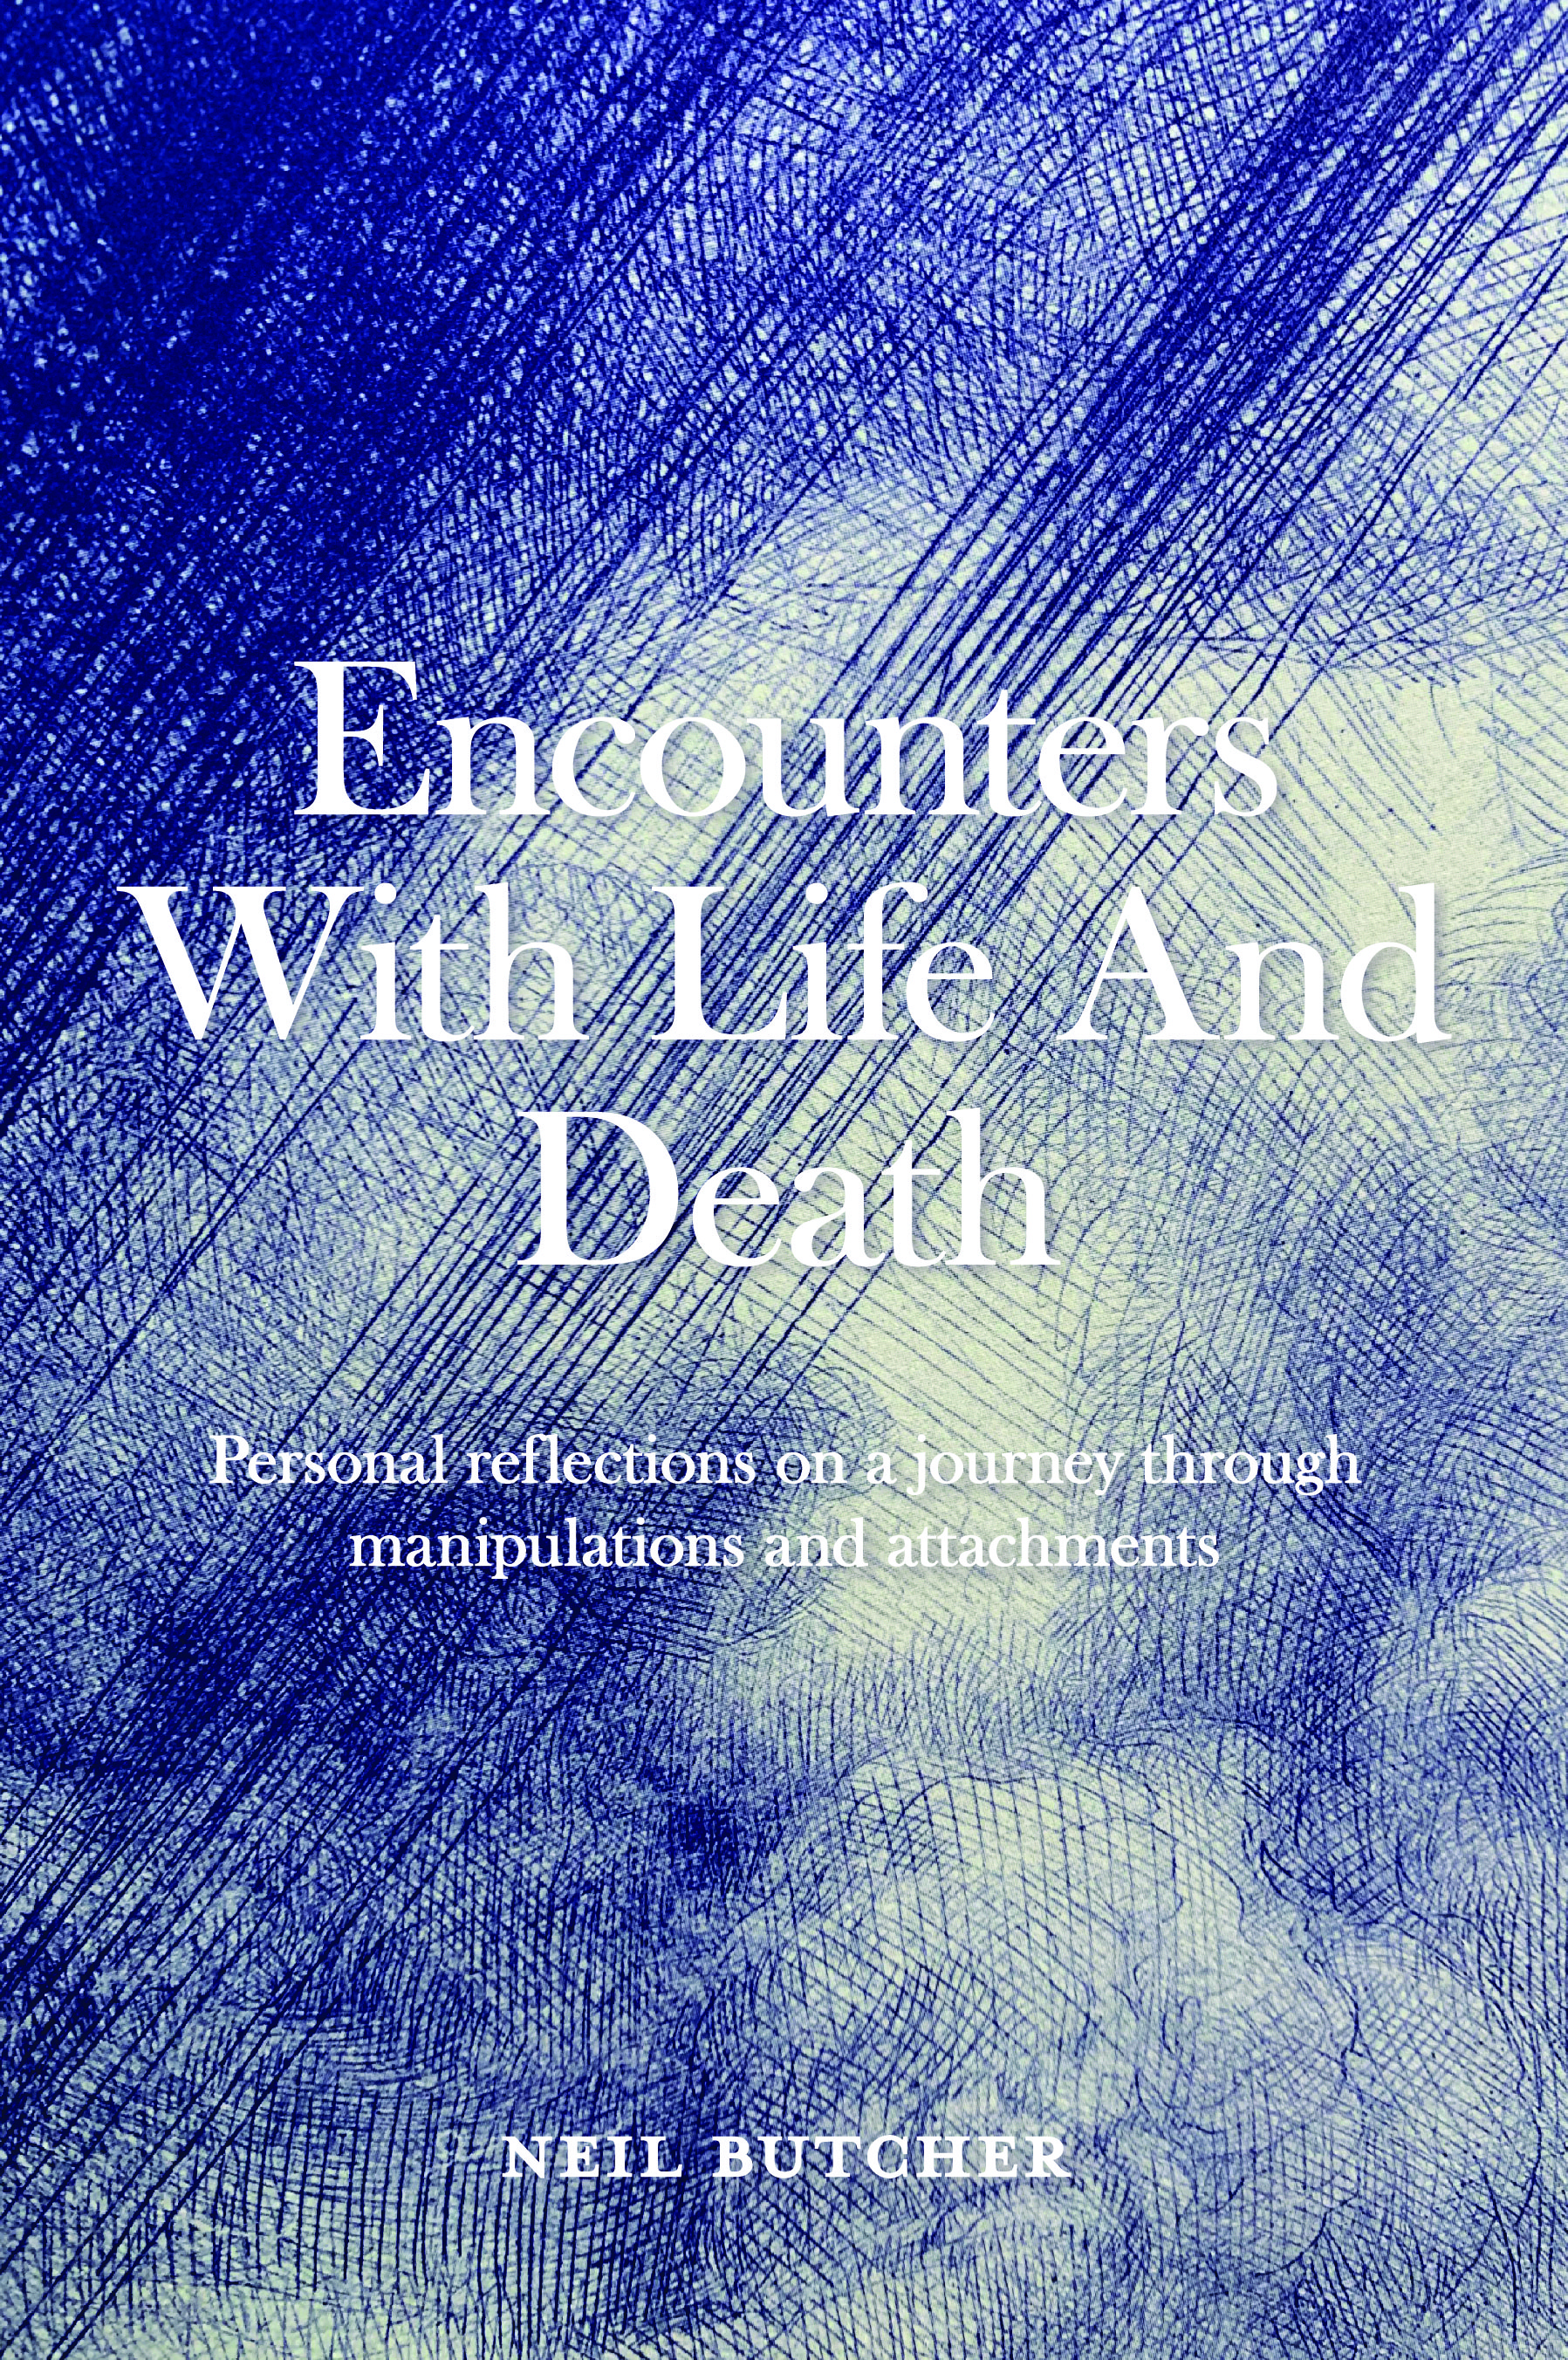 Encounters with Life and Death Personal reflections on a journey through manipulations and attachments